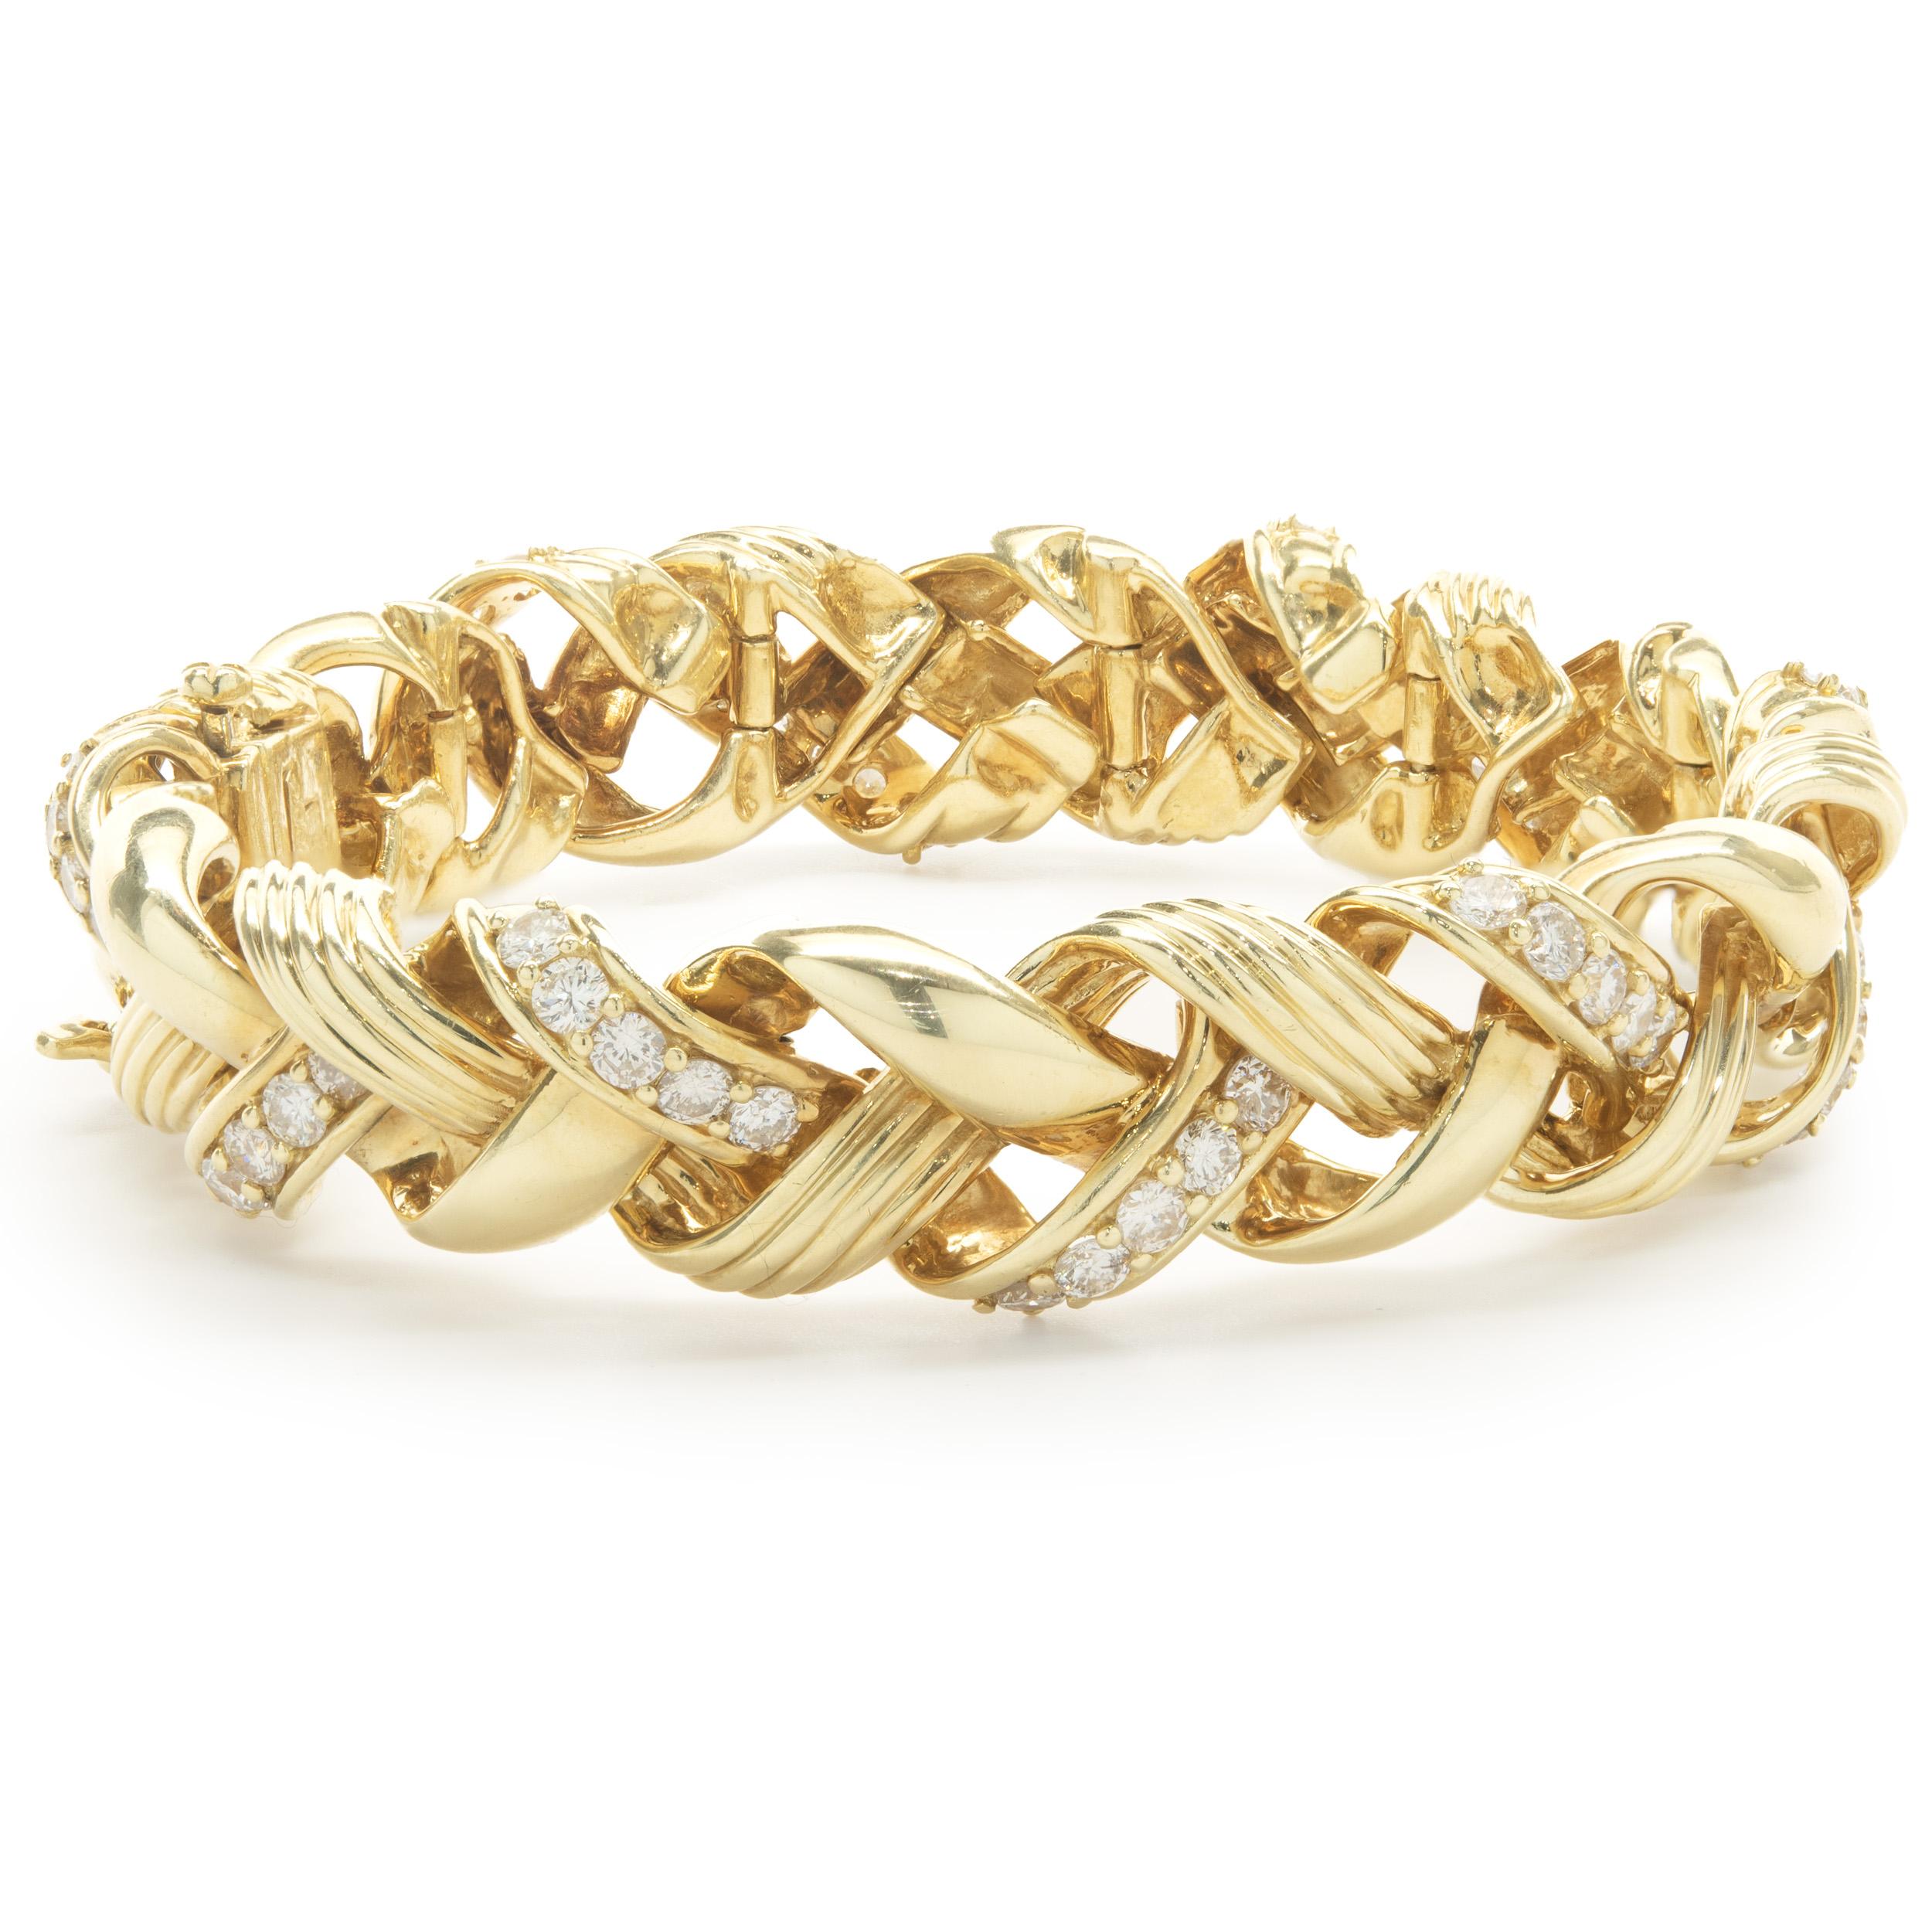 Designer: custom design
Material: 18K yellow gold
Diamonds: 60 round brilliant cut = 1.50cttw
Color: G
Clarity: SI1
Dimensions: bracelet will fit up to a 7-inch wrist
Weight: 82.91 grams